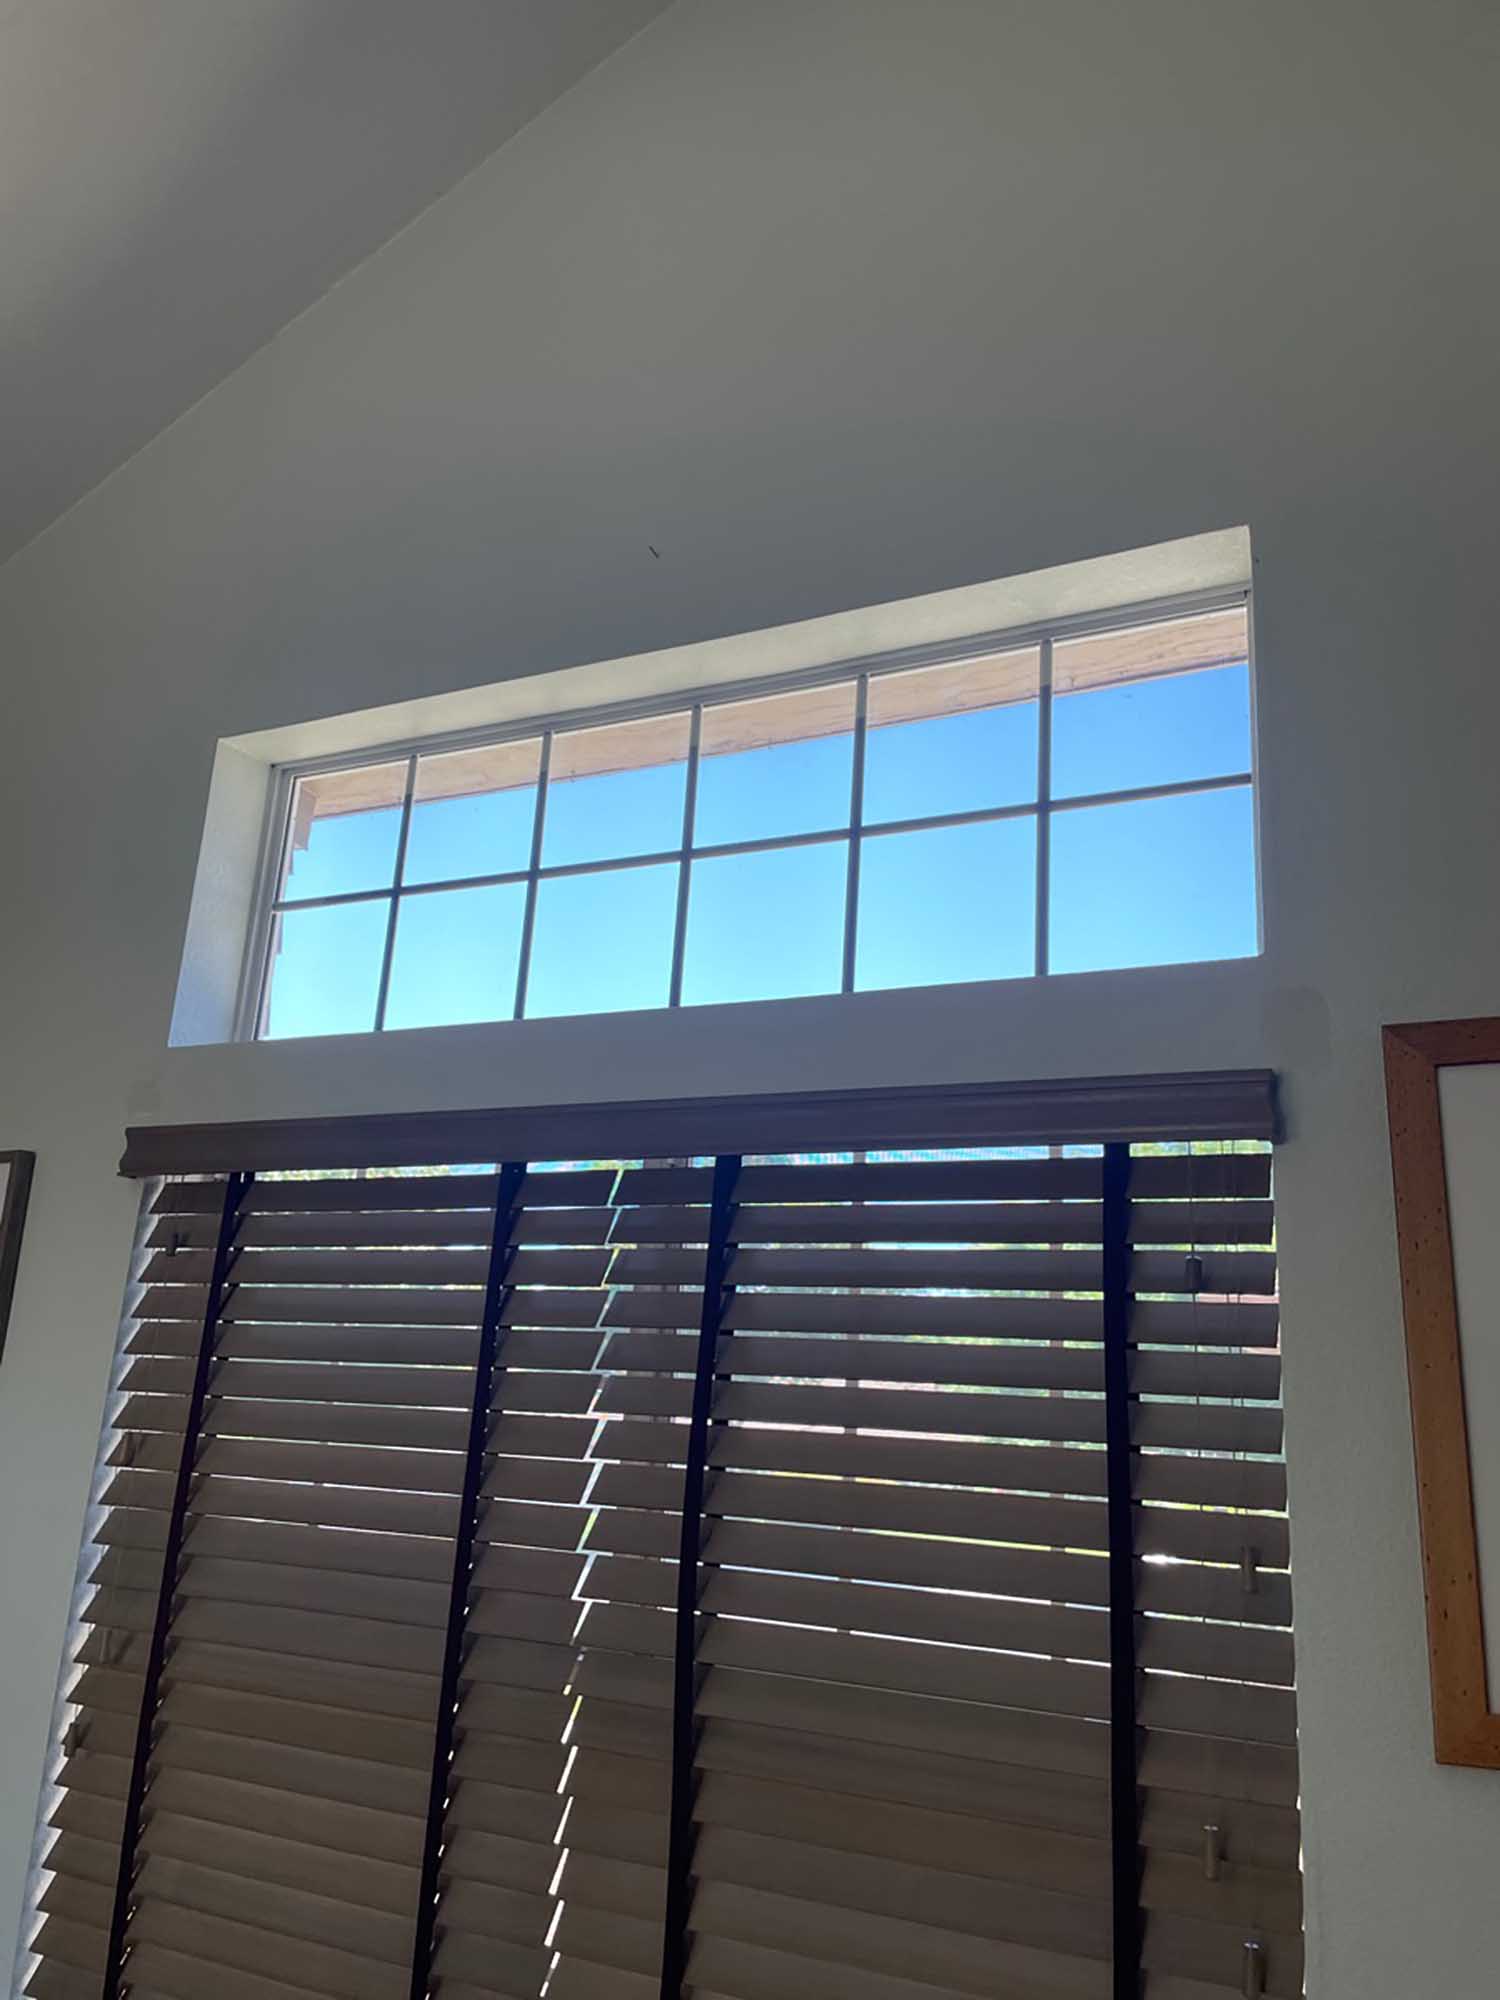 The Best Window Film for Vacaville, CA Homes is the one that works. 3M Window Film, installed by ClimatePro.